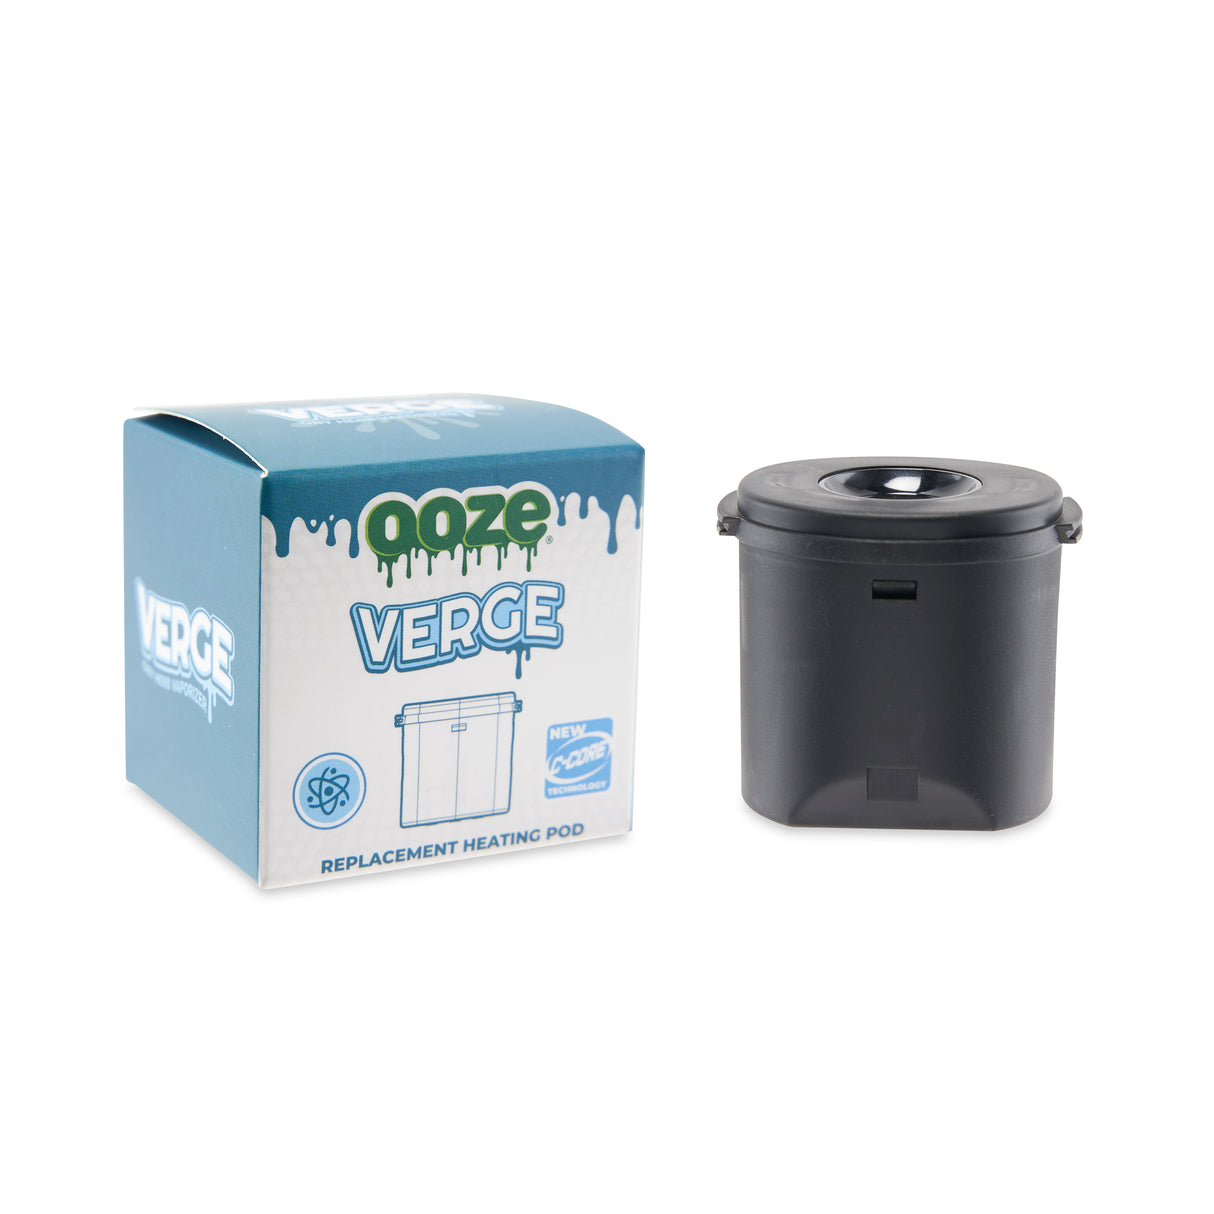 The Ooze Verge replacement heating pod is to the right of its box.